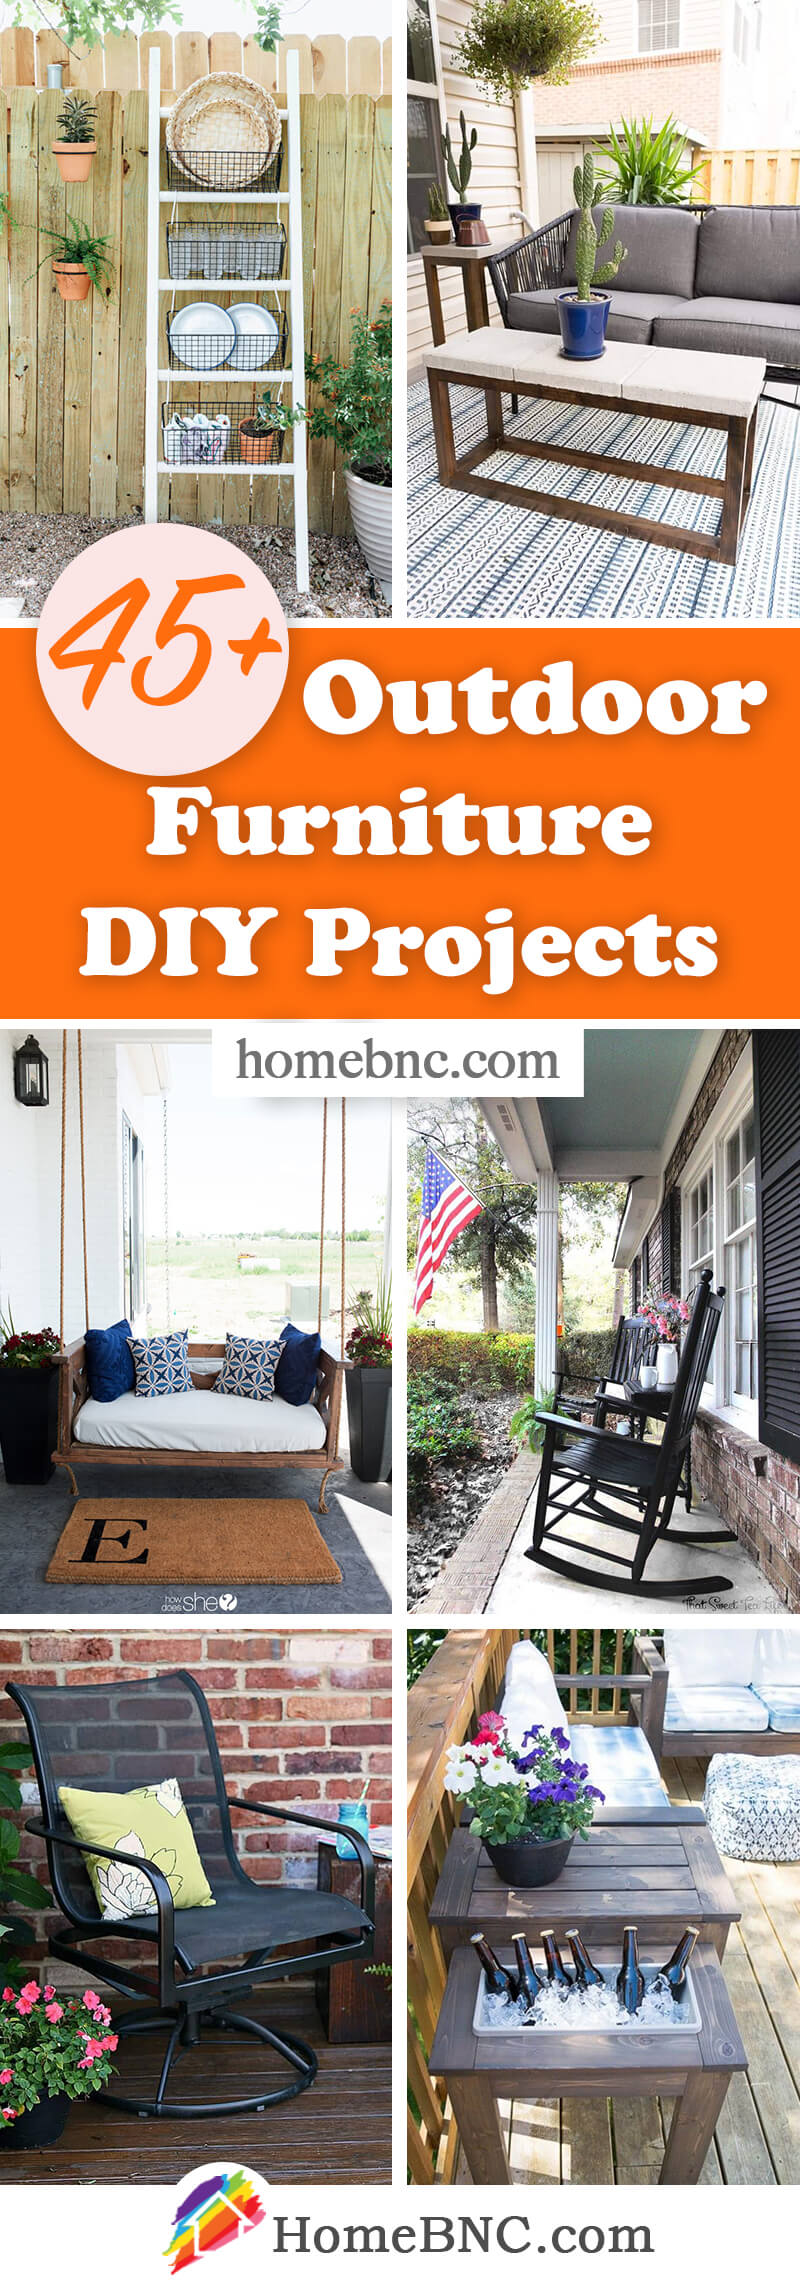 45+ Best DIY Outdoor Furniture Projects (Ideas and Designs) for 2021